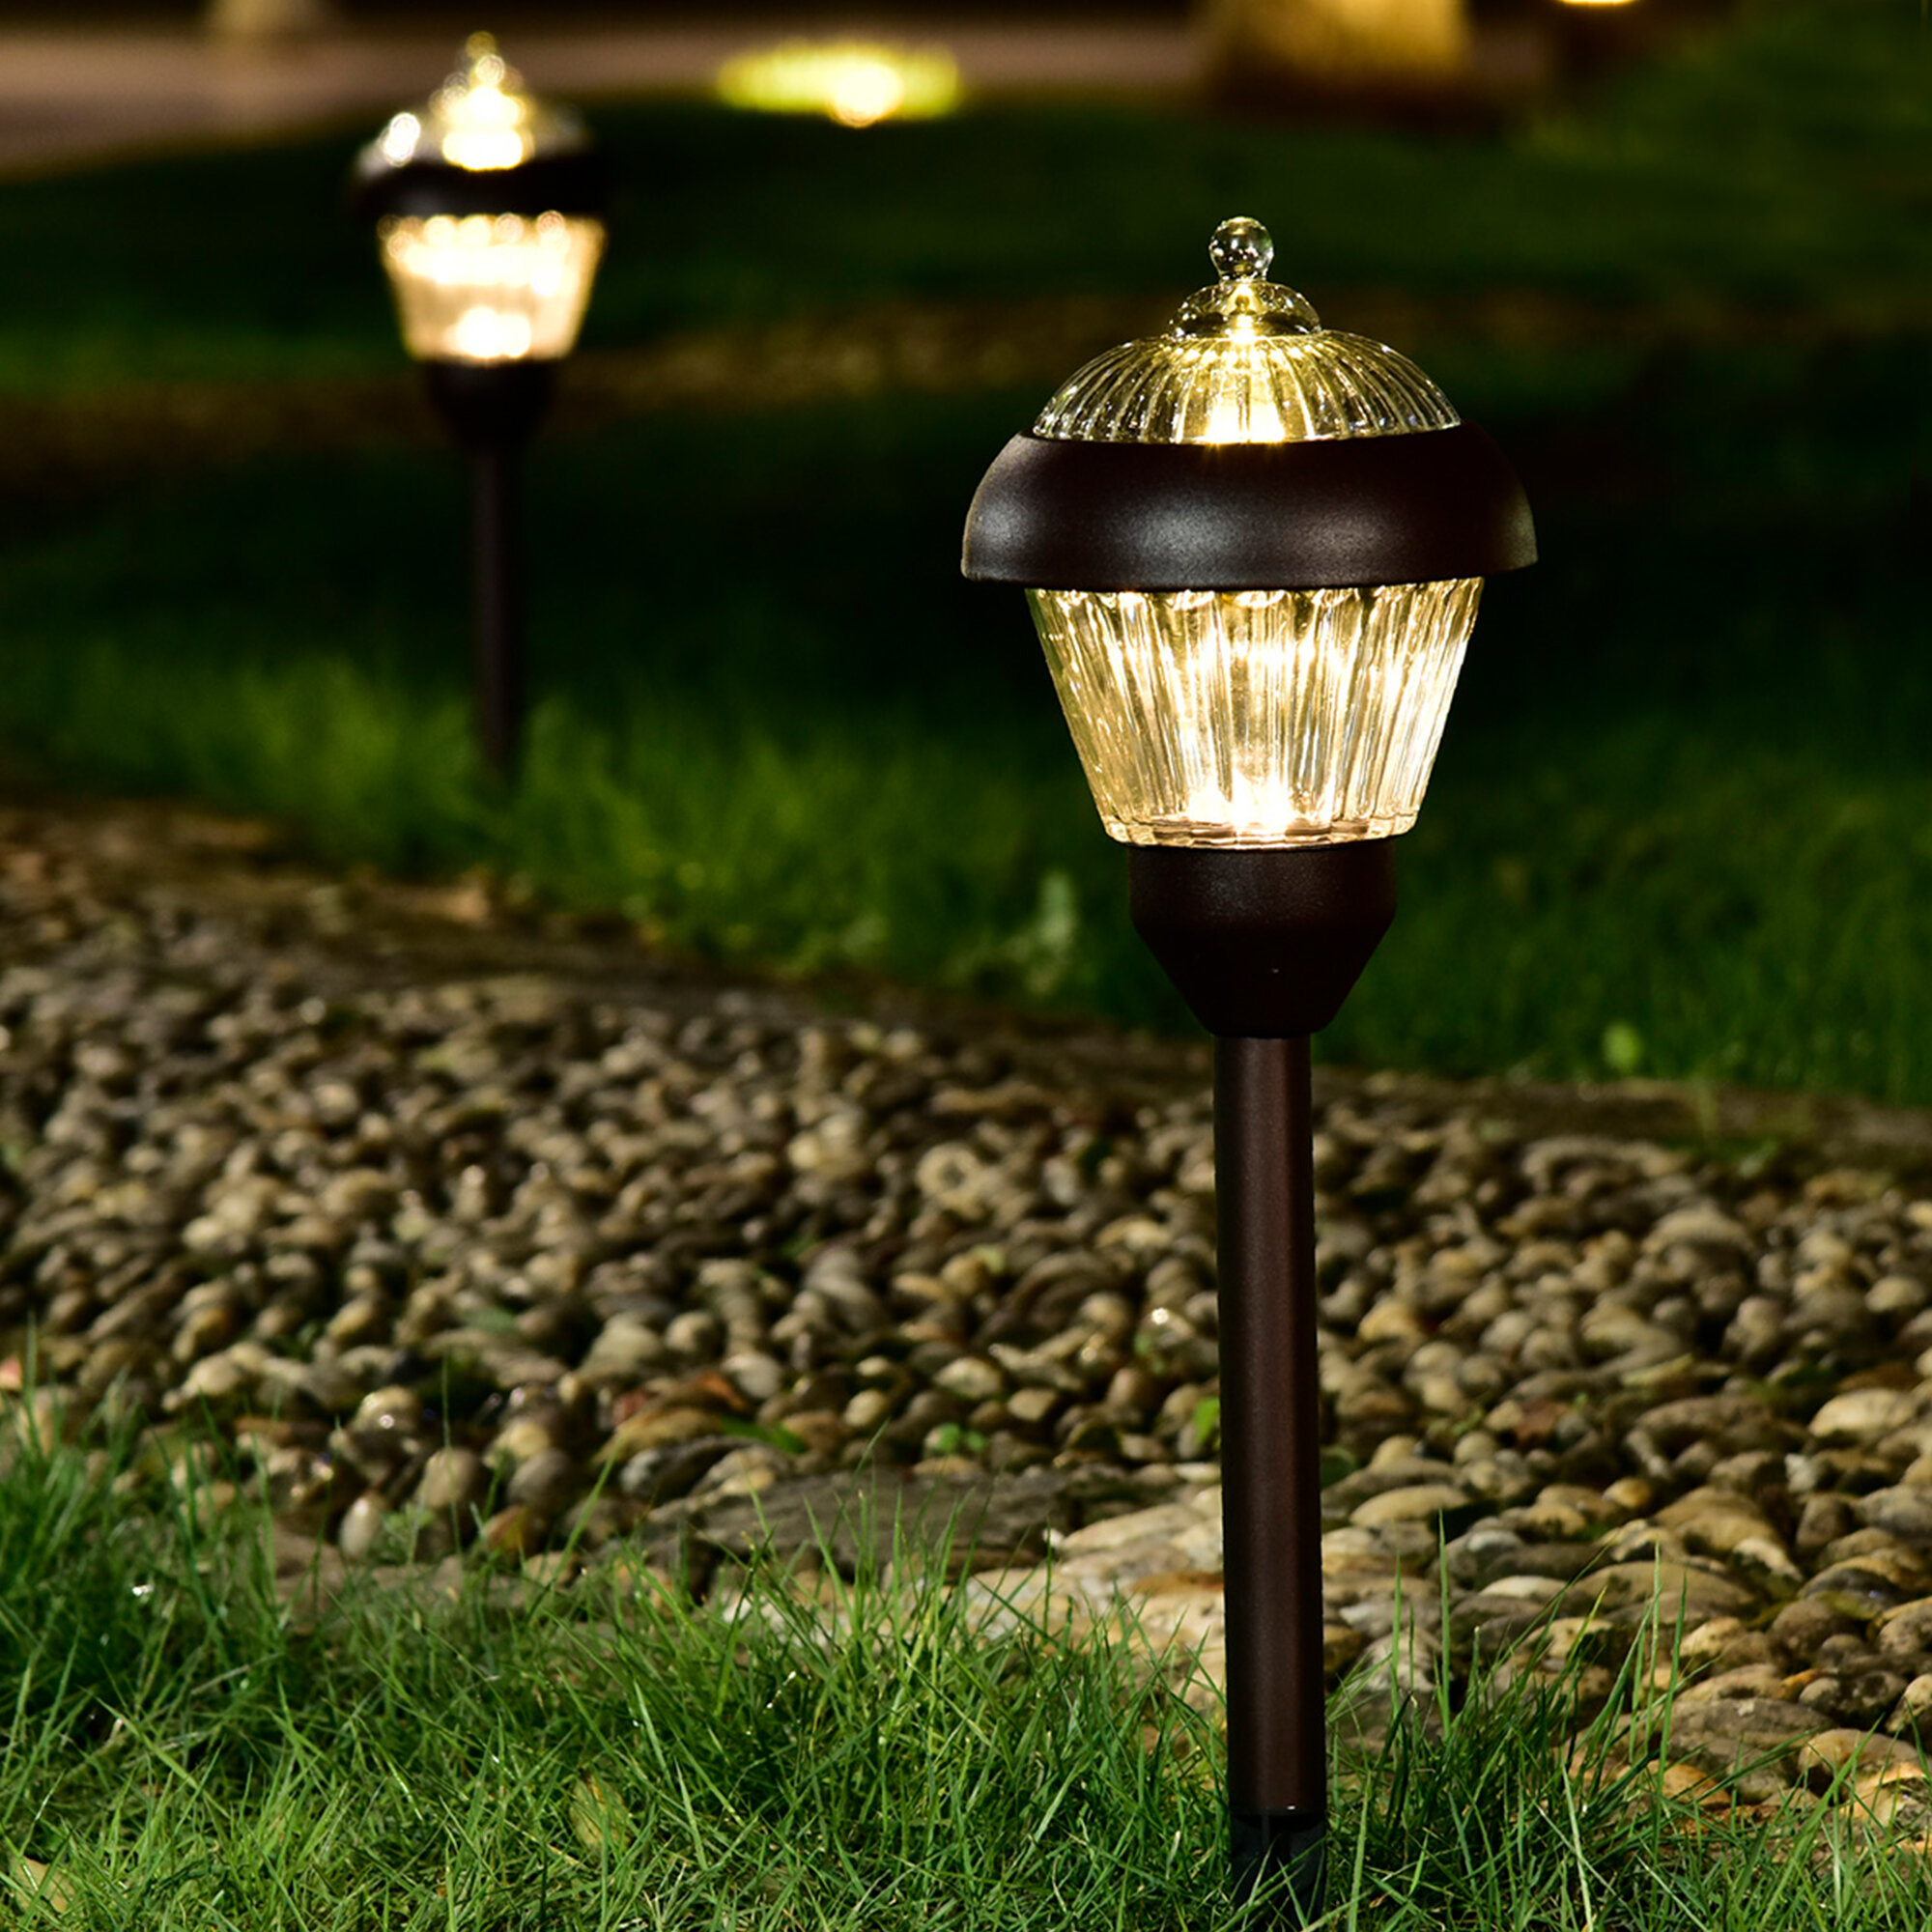 NEW 10 PACK SOLAR POWERED BRONZE FENCE OR DRIVEWAY LED LIGHTS AUTO ON AT DUSK 